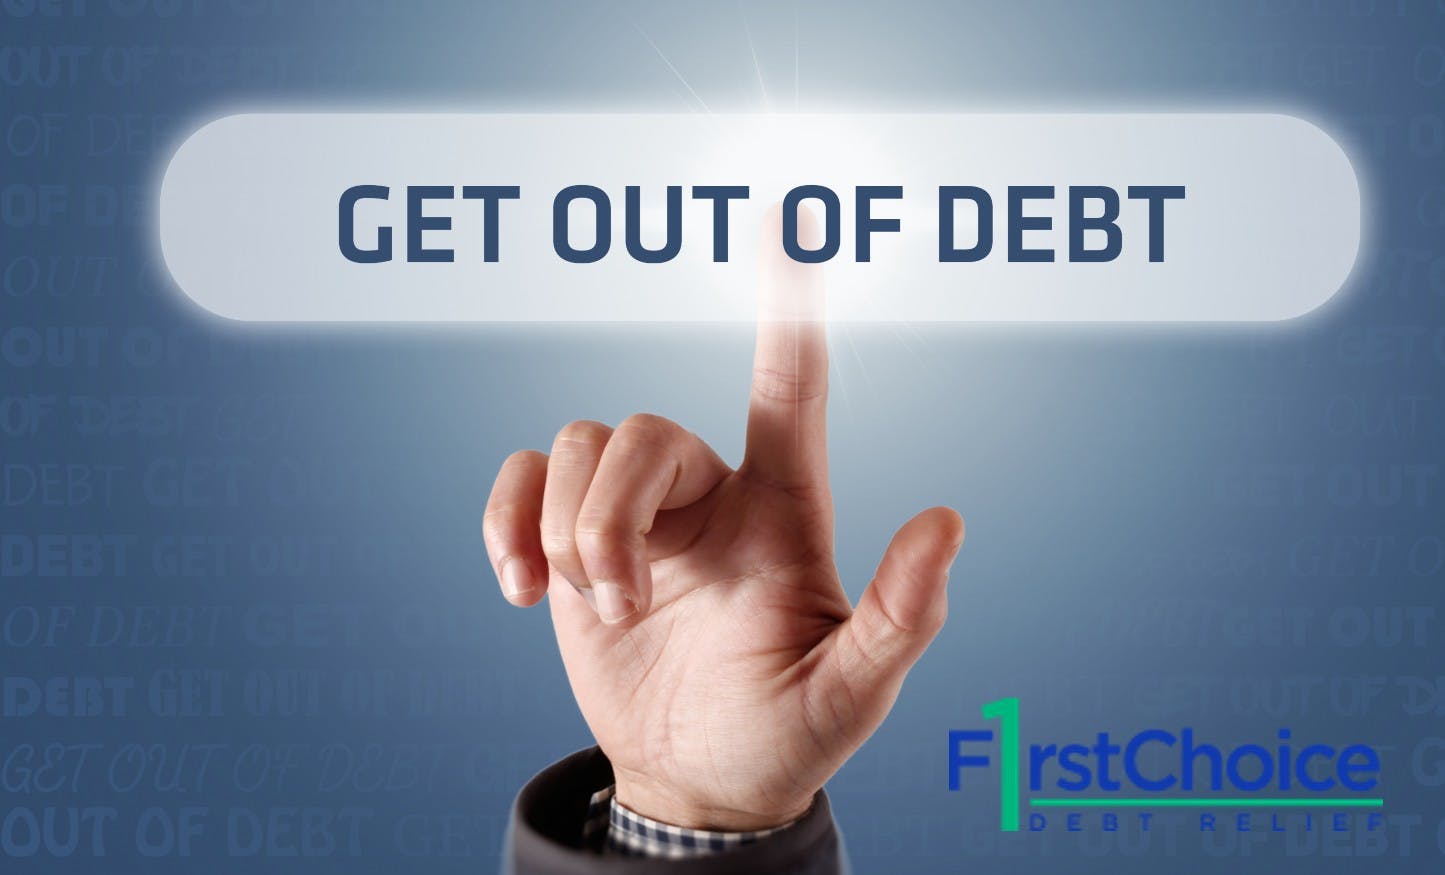 First Choice Debt Relief Review: All You Need to Know